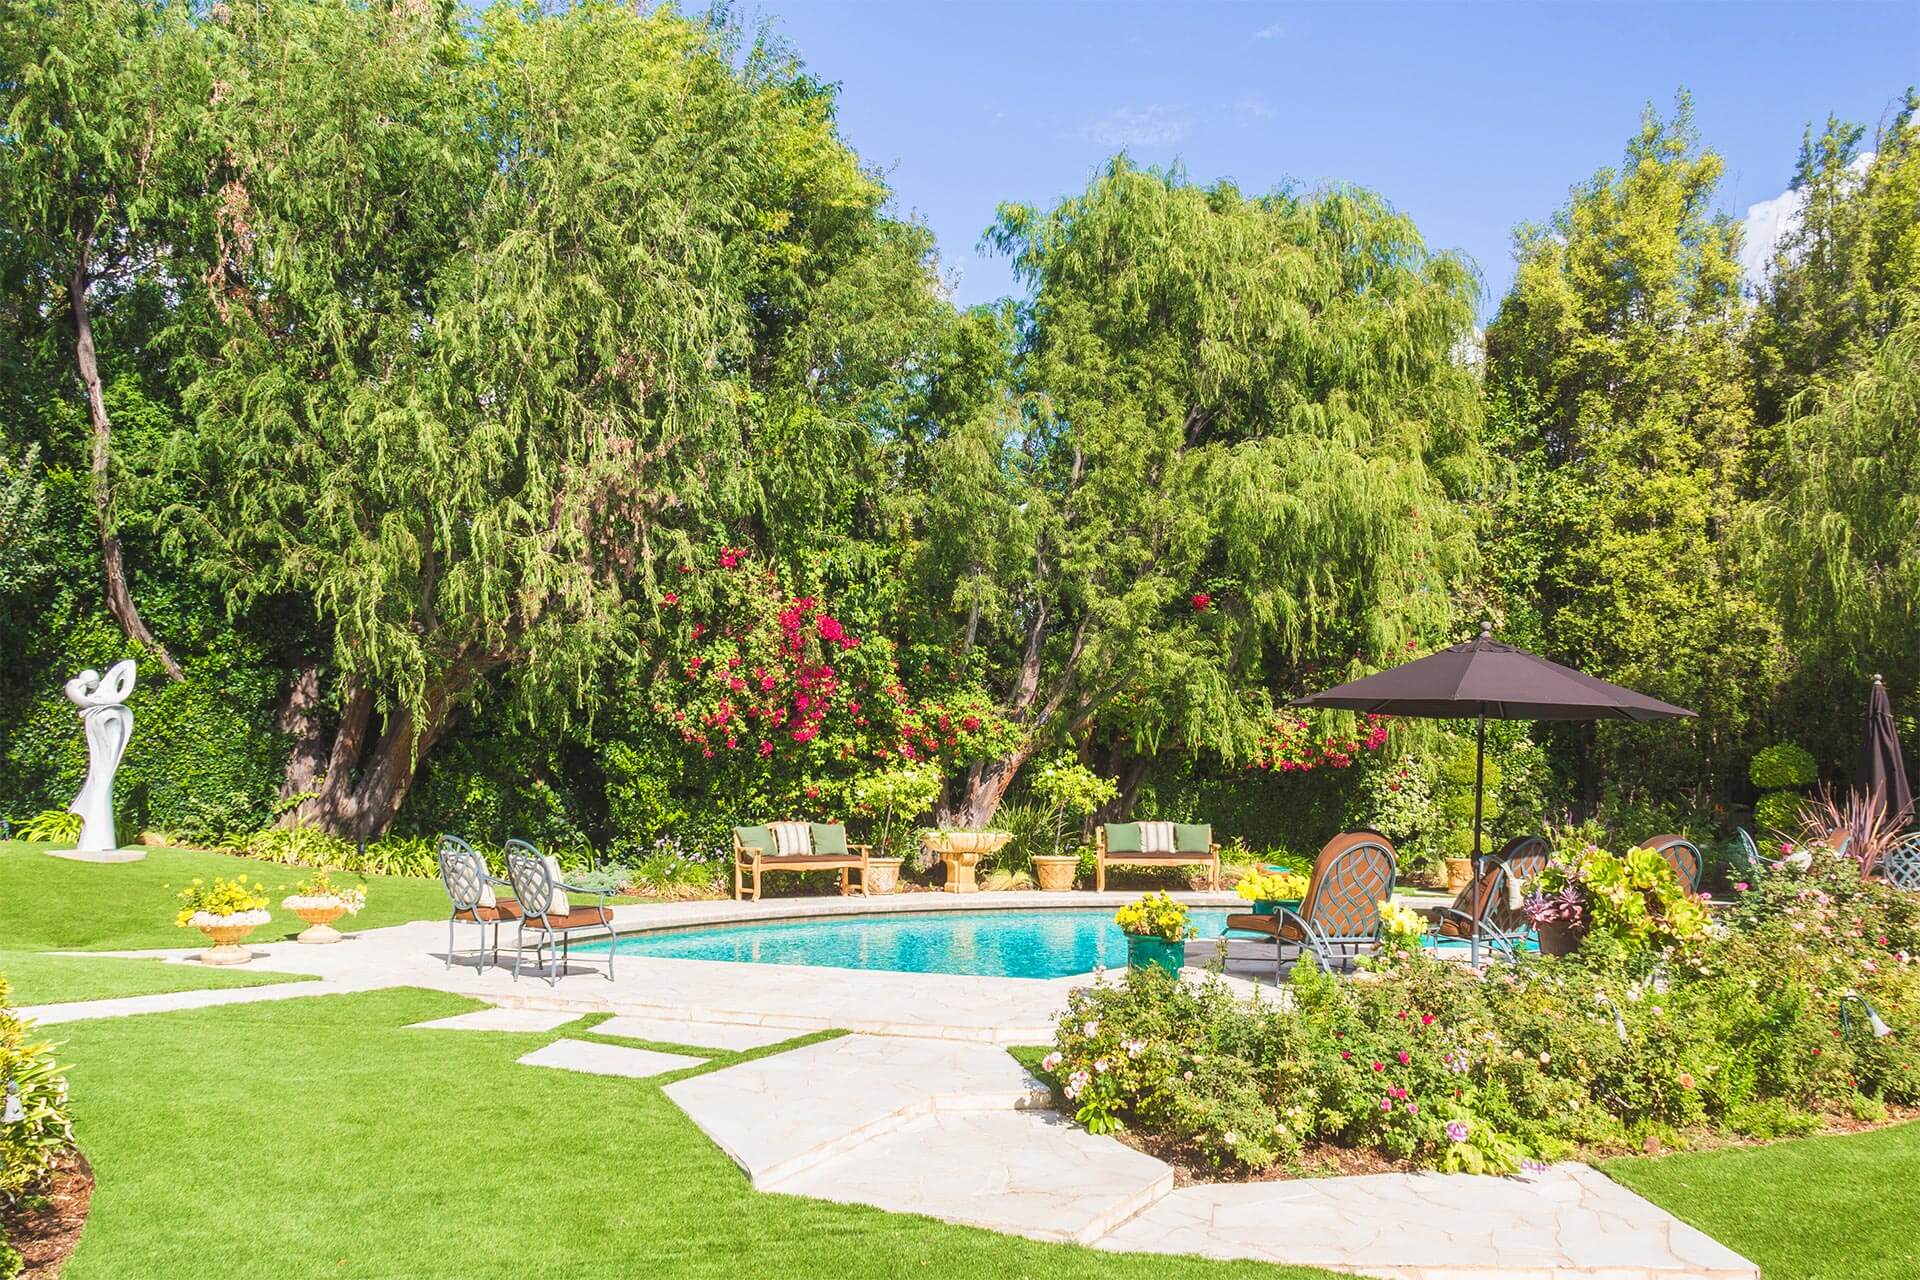 Real Estate Photography, Pool and backyard in Beverly Hills California by photographer Travis Chenoweth